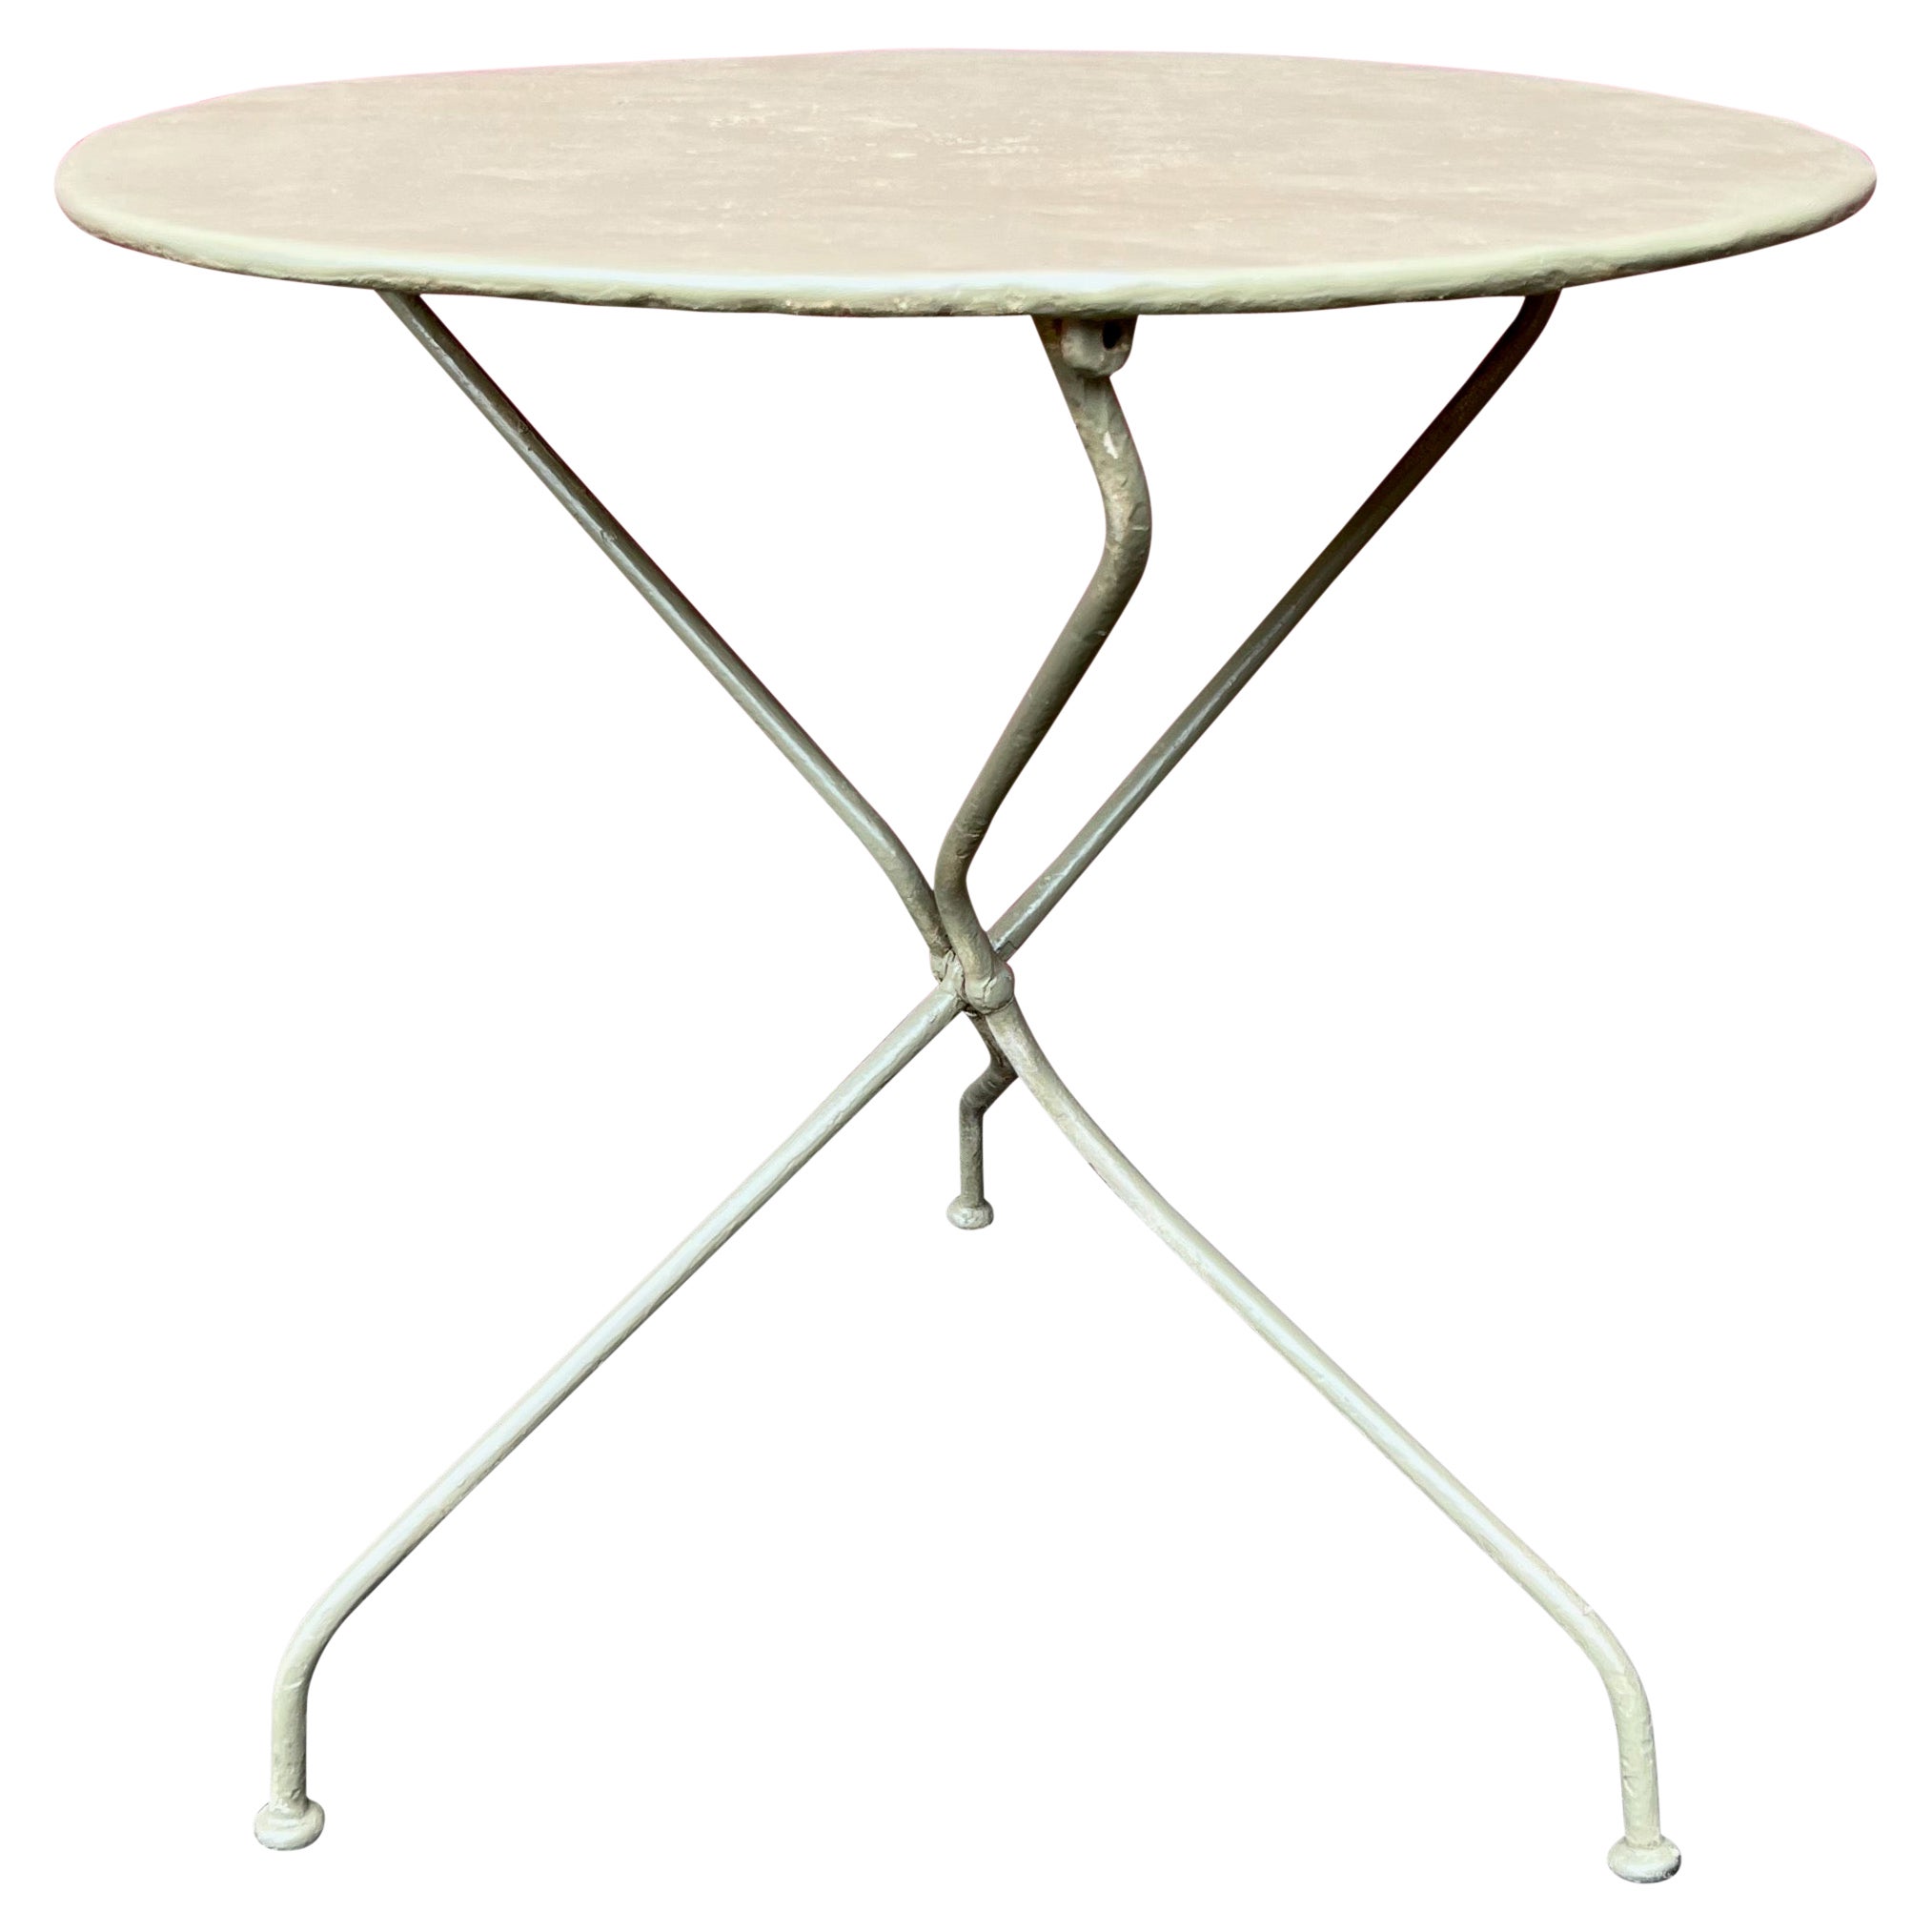 Small Green Painted Folding French Bistro Table